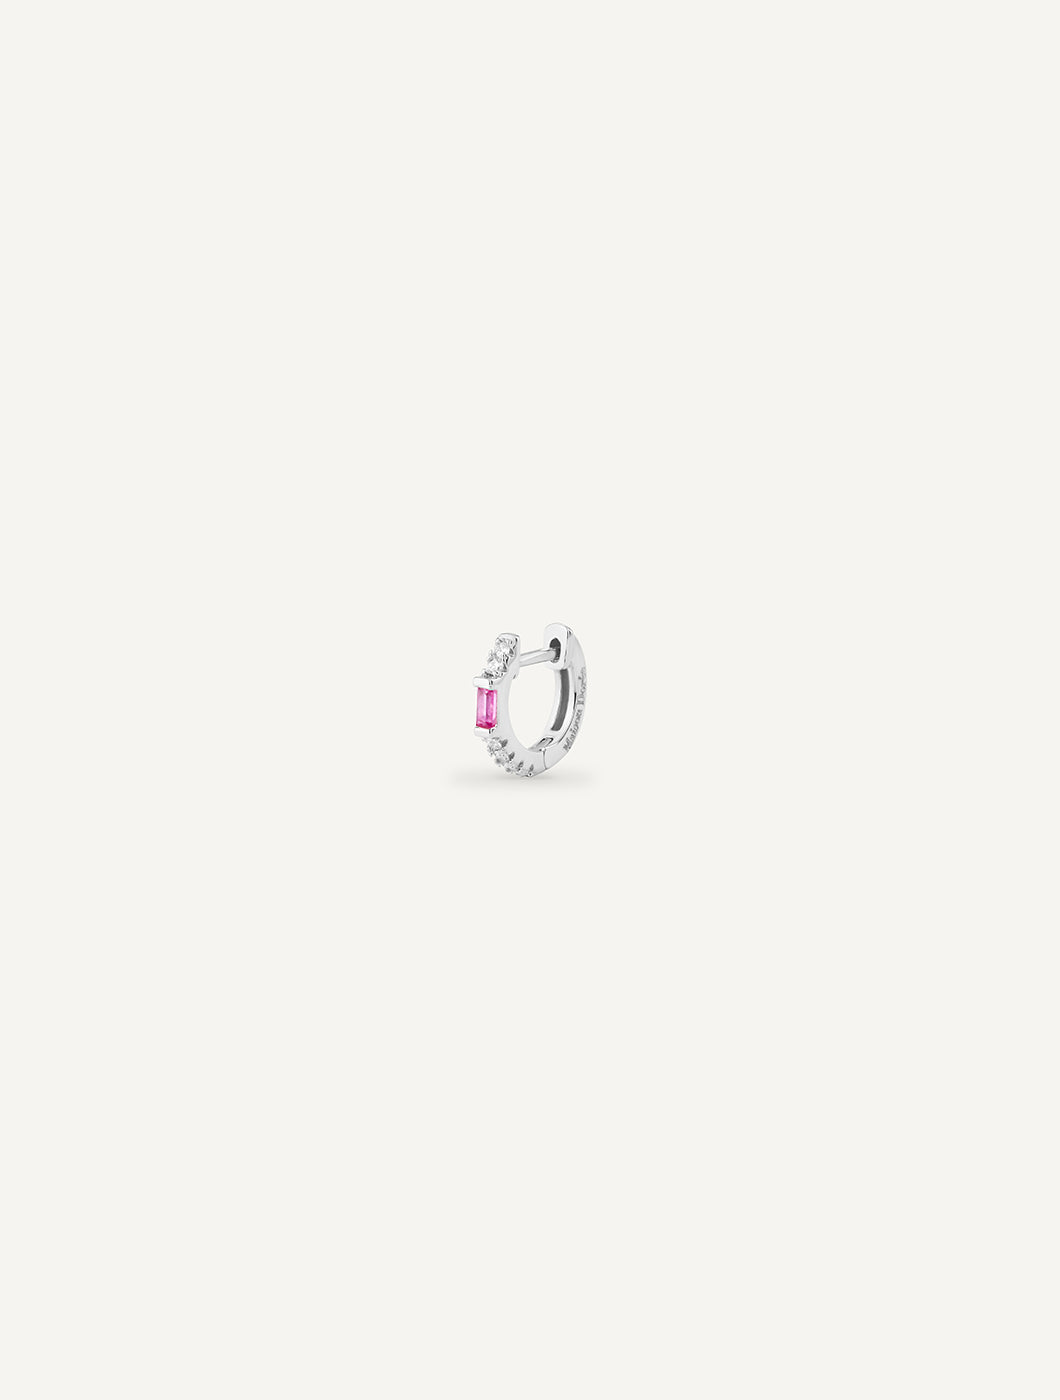 MONO BOUCLE D'OREILLE PINK SPARKLY HOOP